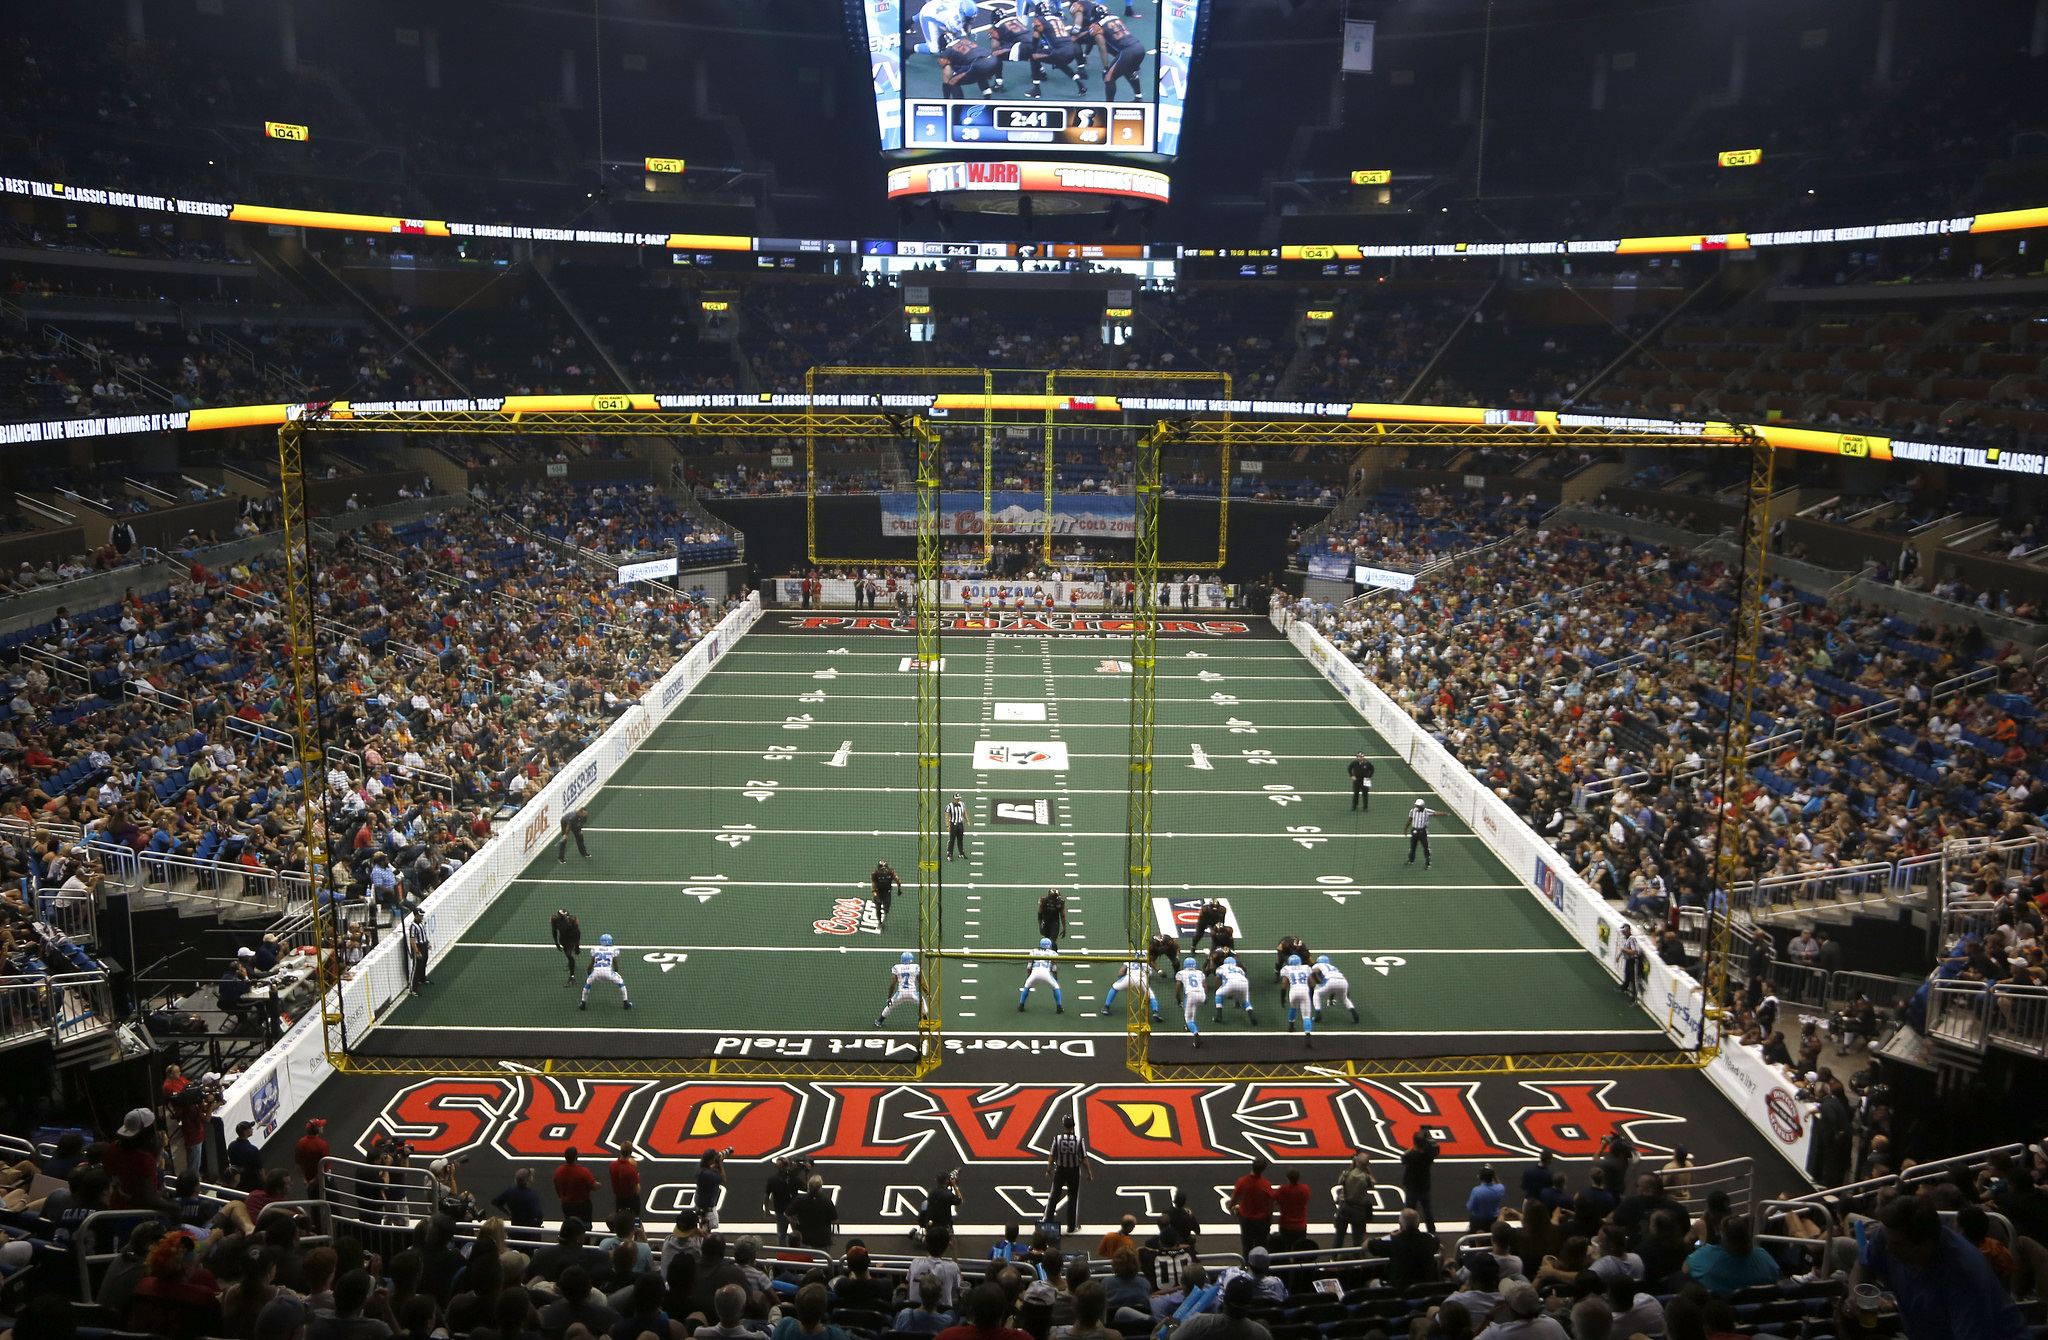 Not a picture from that game but of the Orlando Predators